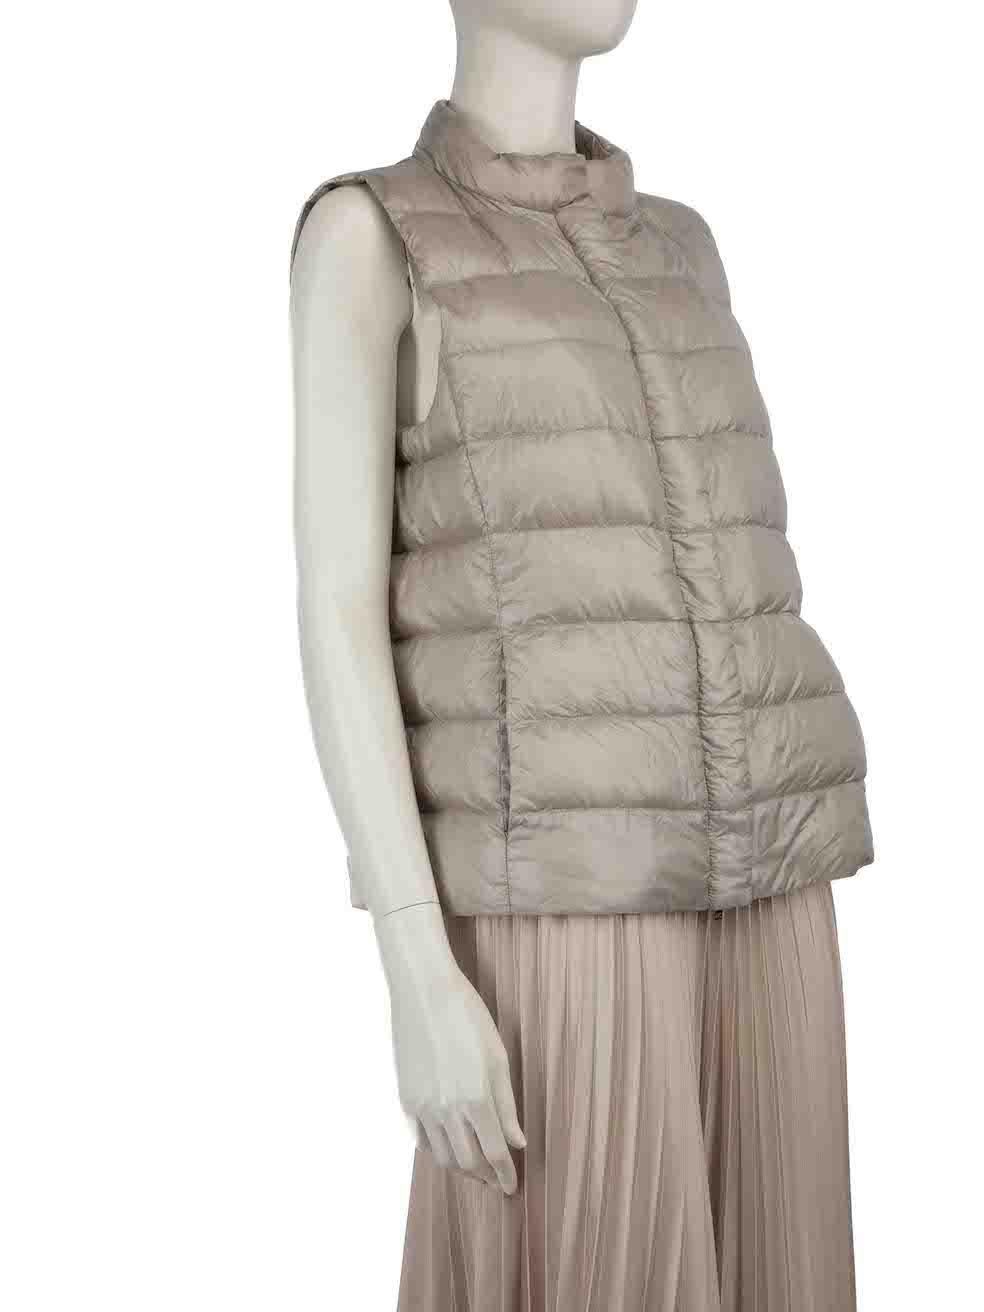 CONDITION is Very good. Minimal wear to jacket is evident. Minimal wear to the front with small marks at the bust on this used Herno designer resale item.
 
 
 
 Details
 
 
 Beige
 
 Synthetic
 
 Gilet
 
 Quilted
 
 Feather down padding
 
 Zip and